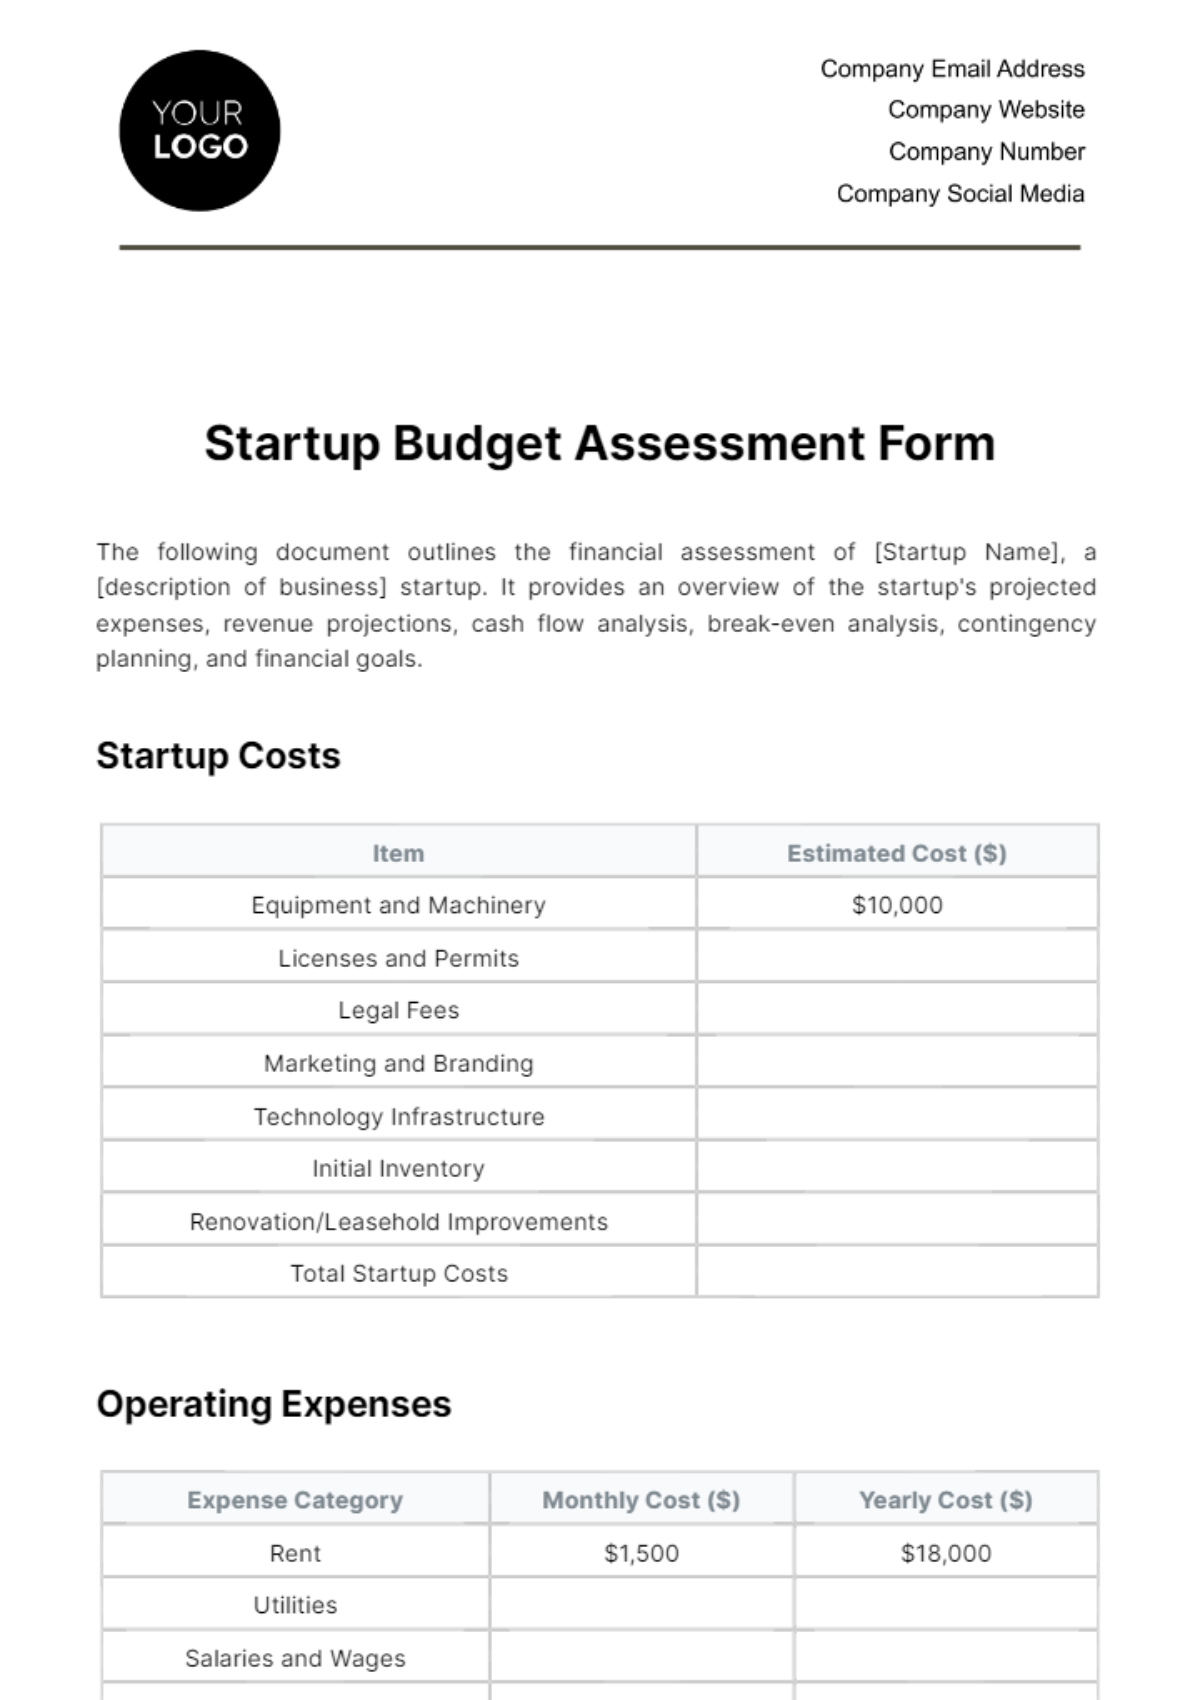 Free Startup Budget Assessment Form Template